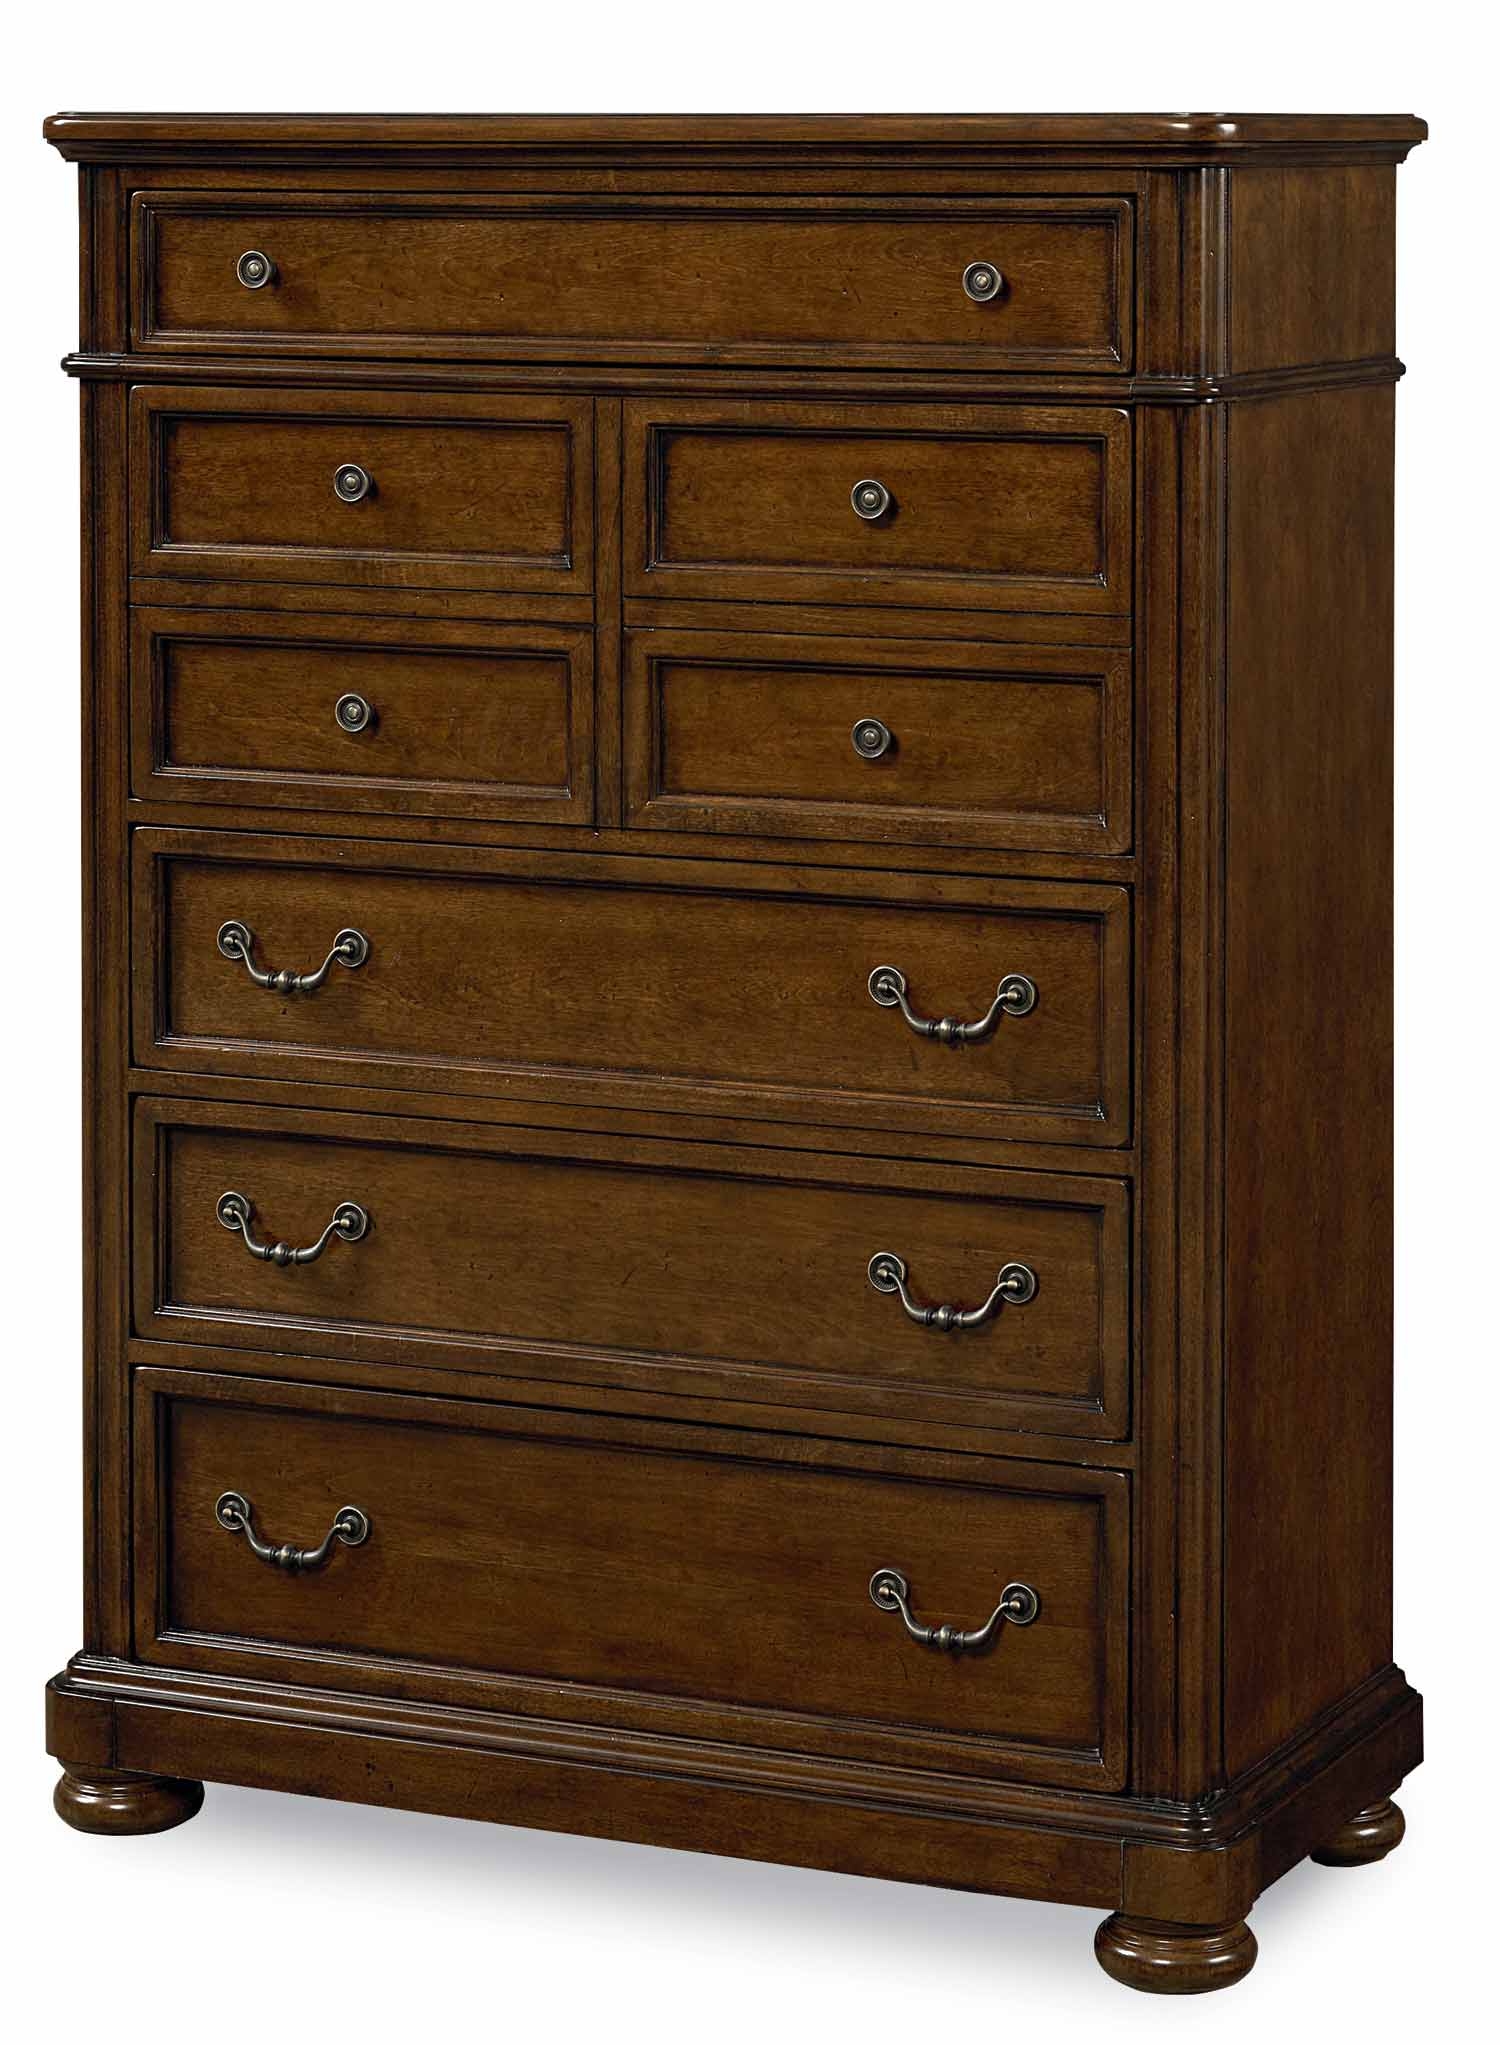 Legacy Classic Summerfield Drawer Chest